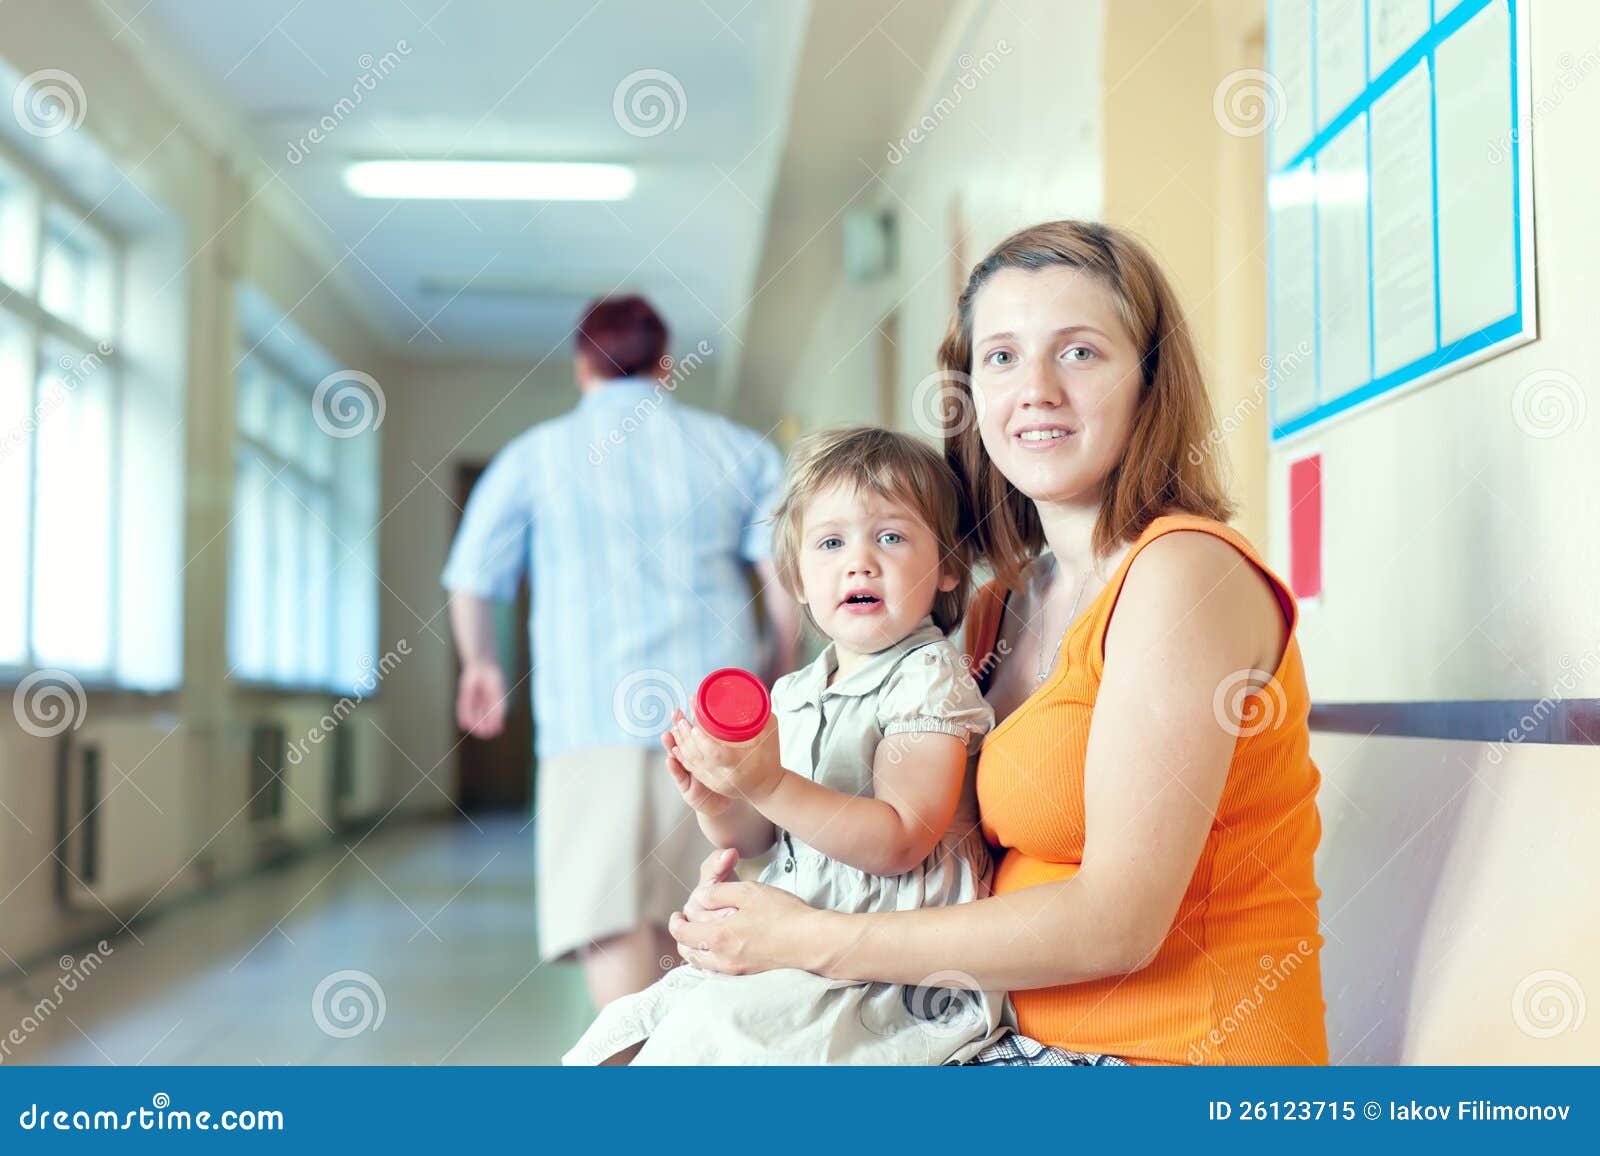 pregnant woman and child with urinalysis sample